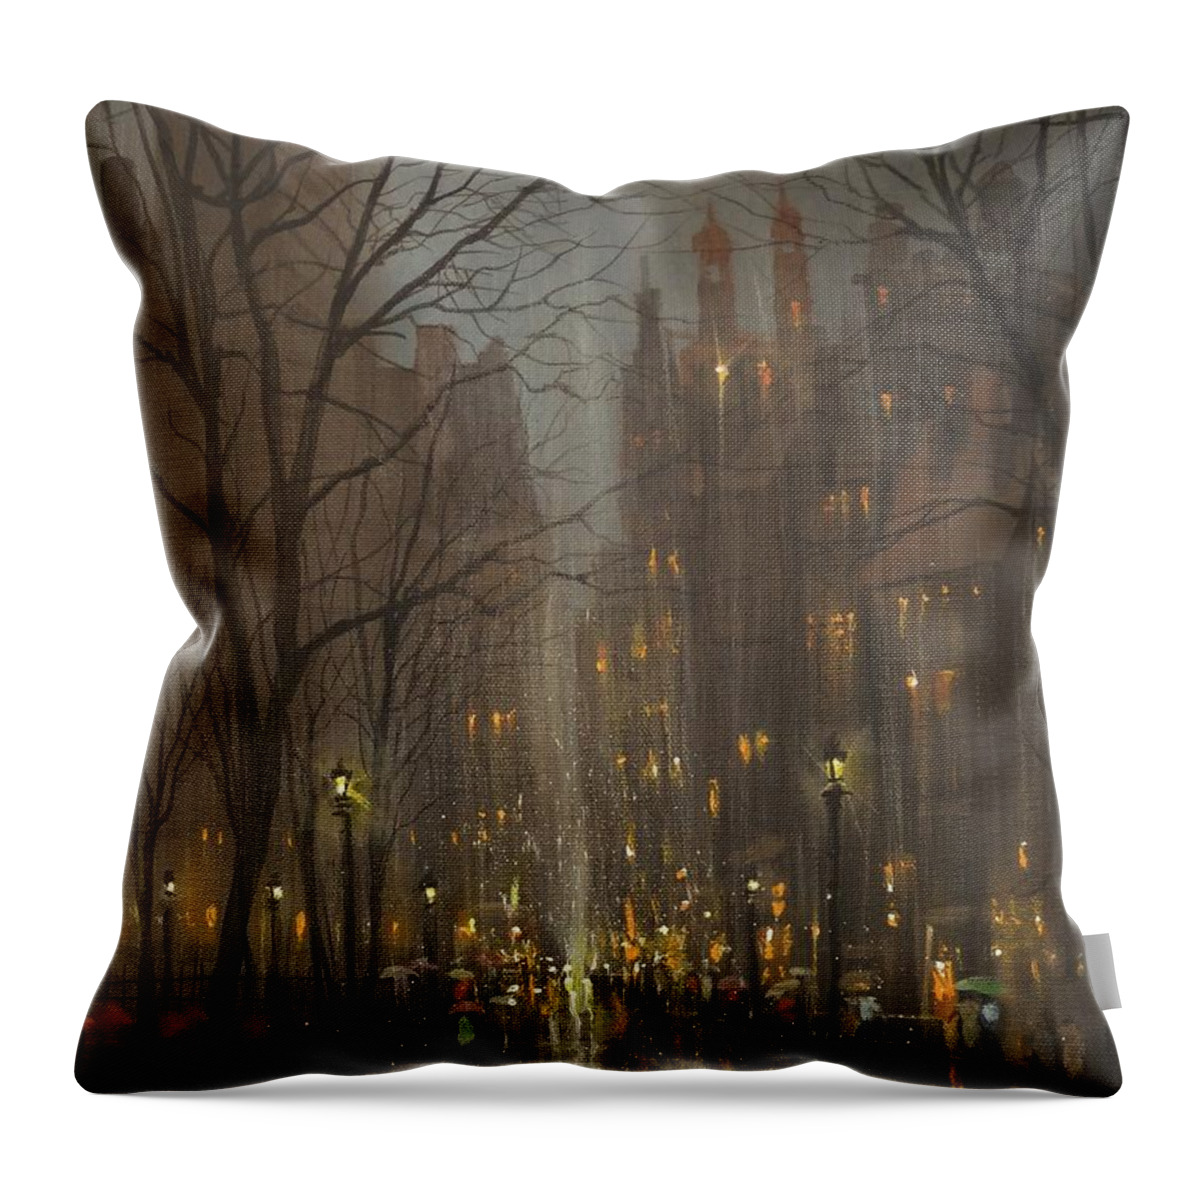 City Rain Throw Pillow featuring the painting City Park by Tom Shropshire